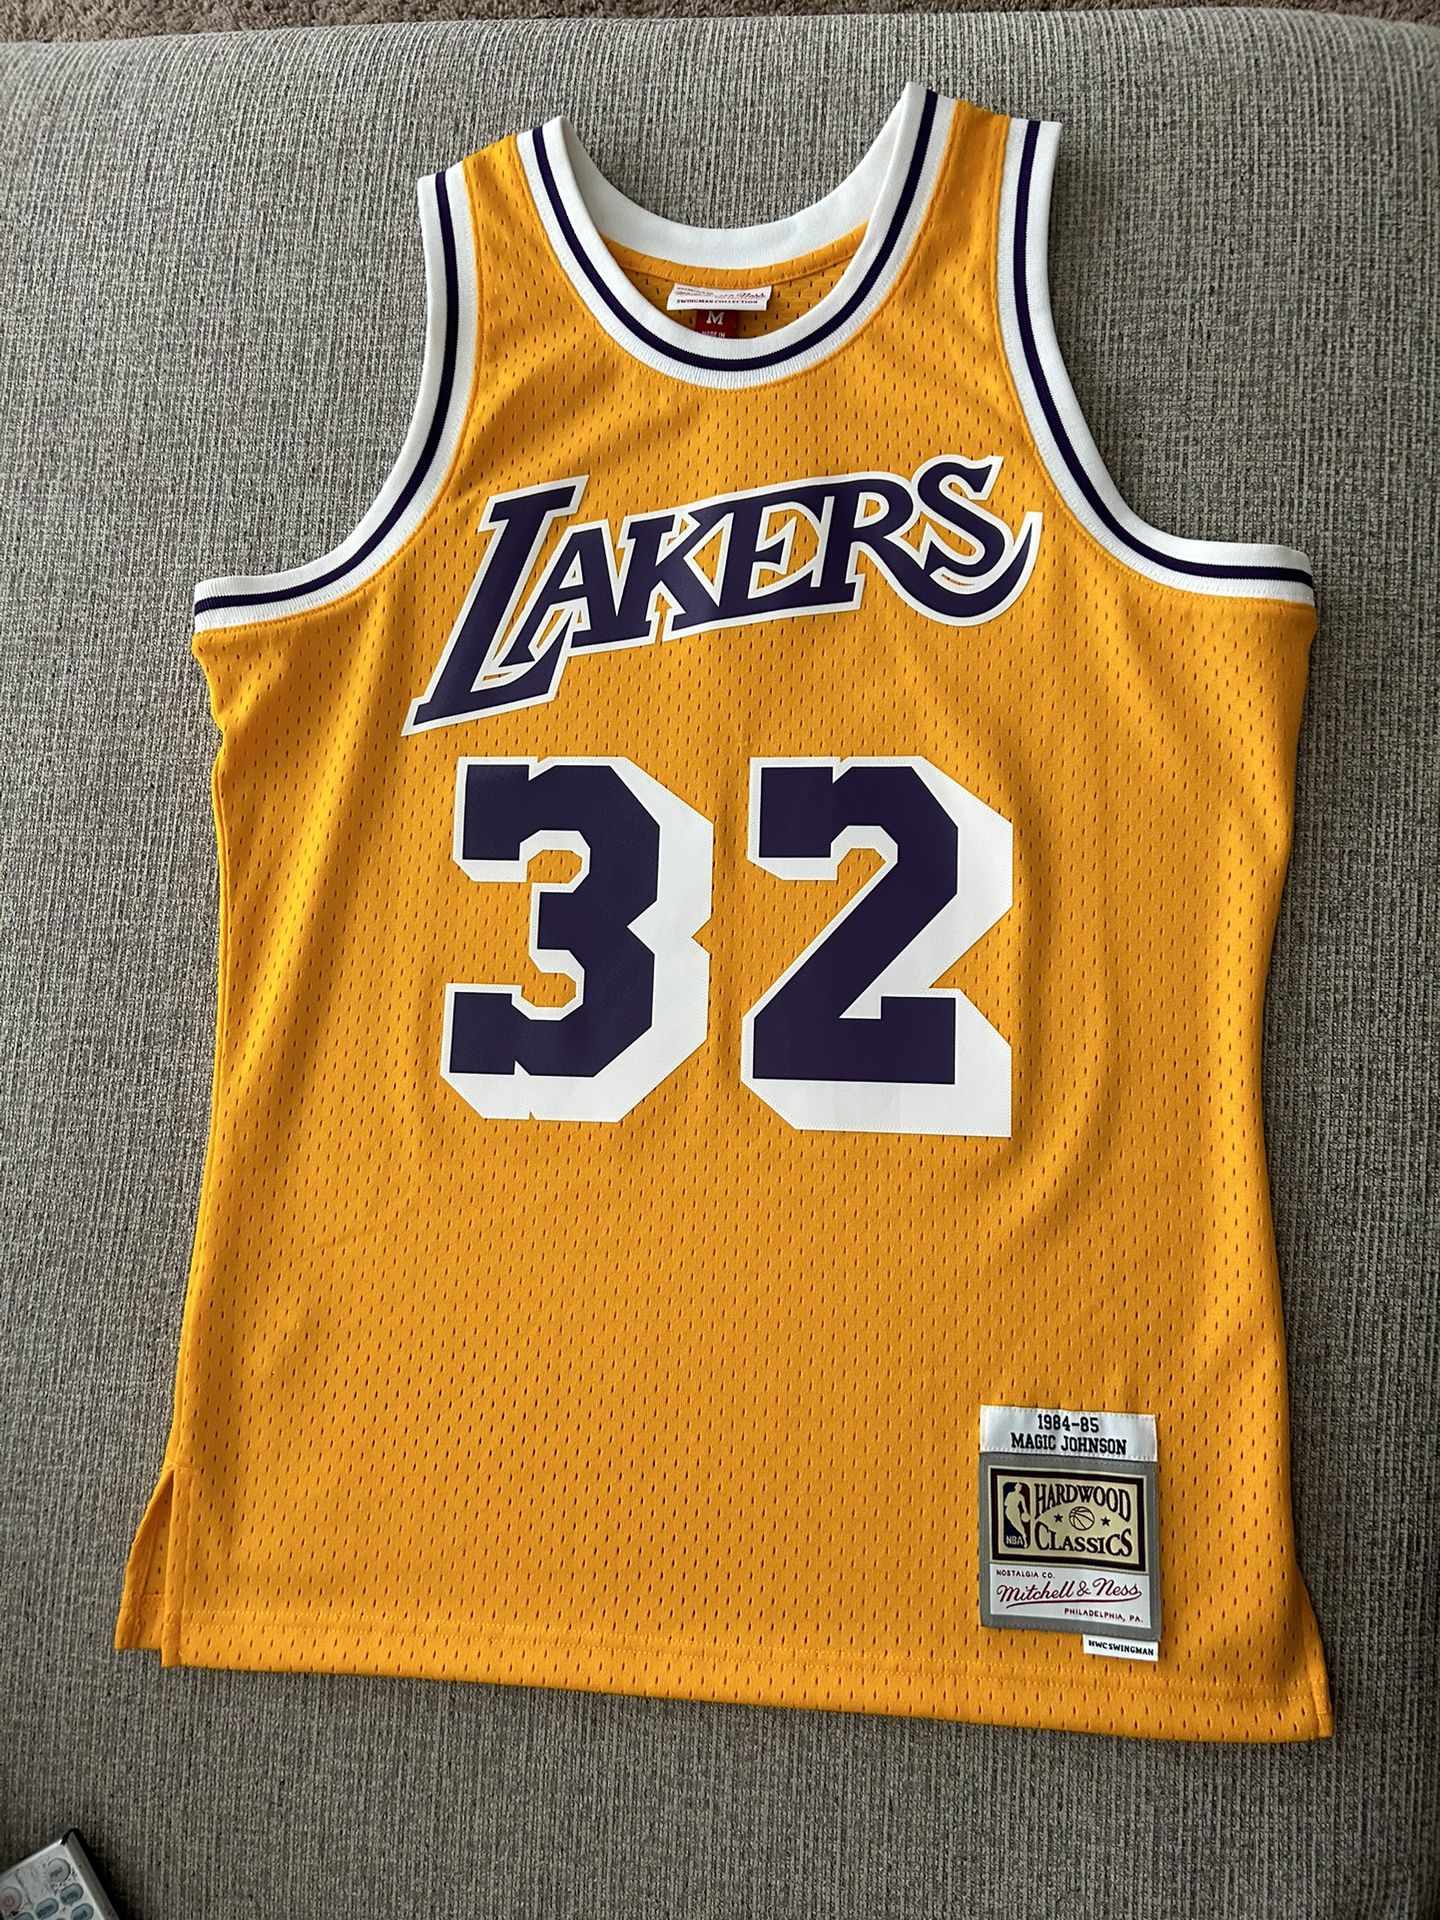 100% Authentic Lakers Jersey